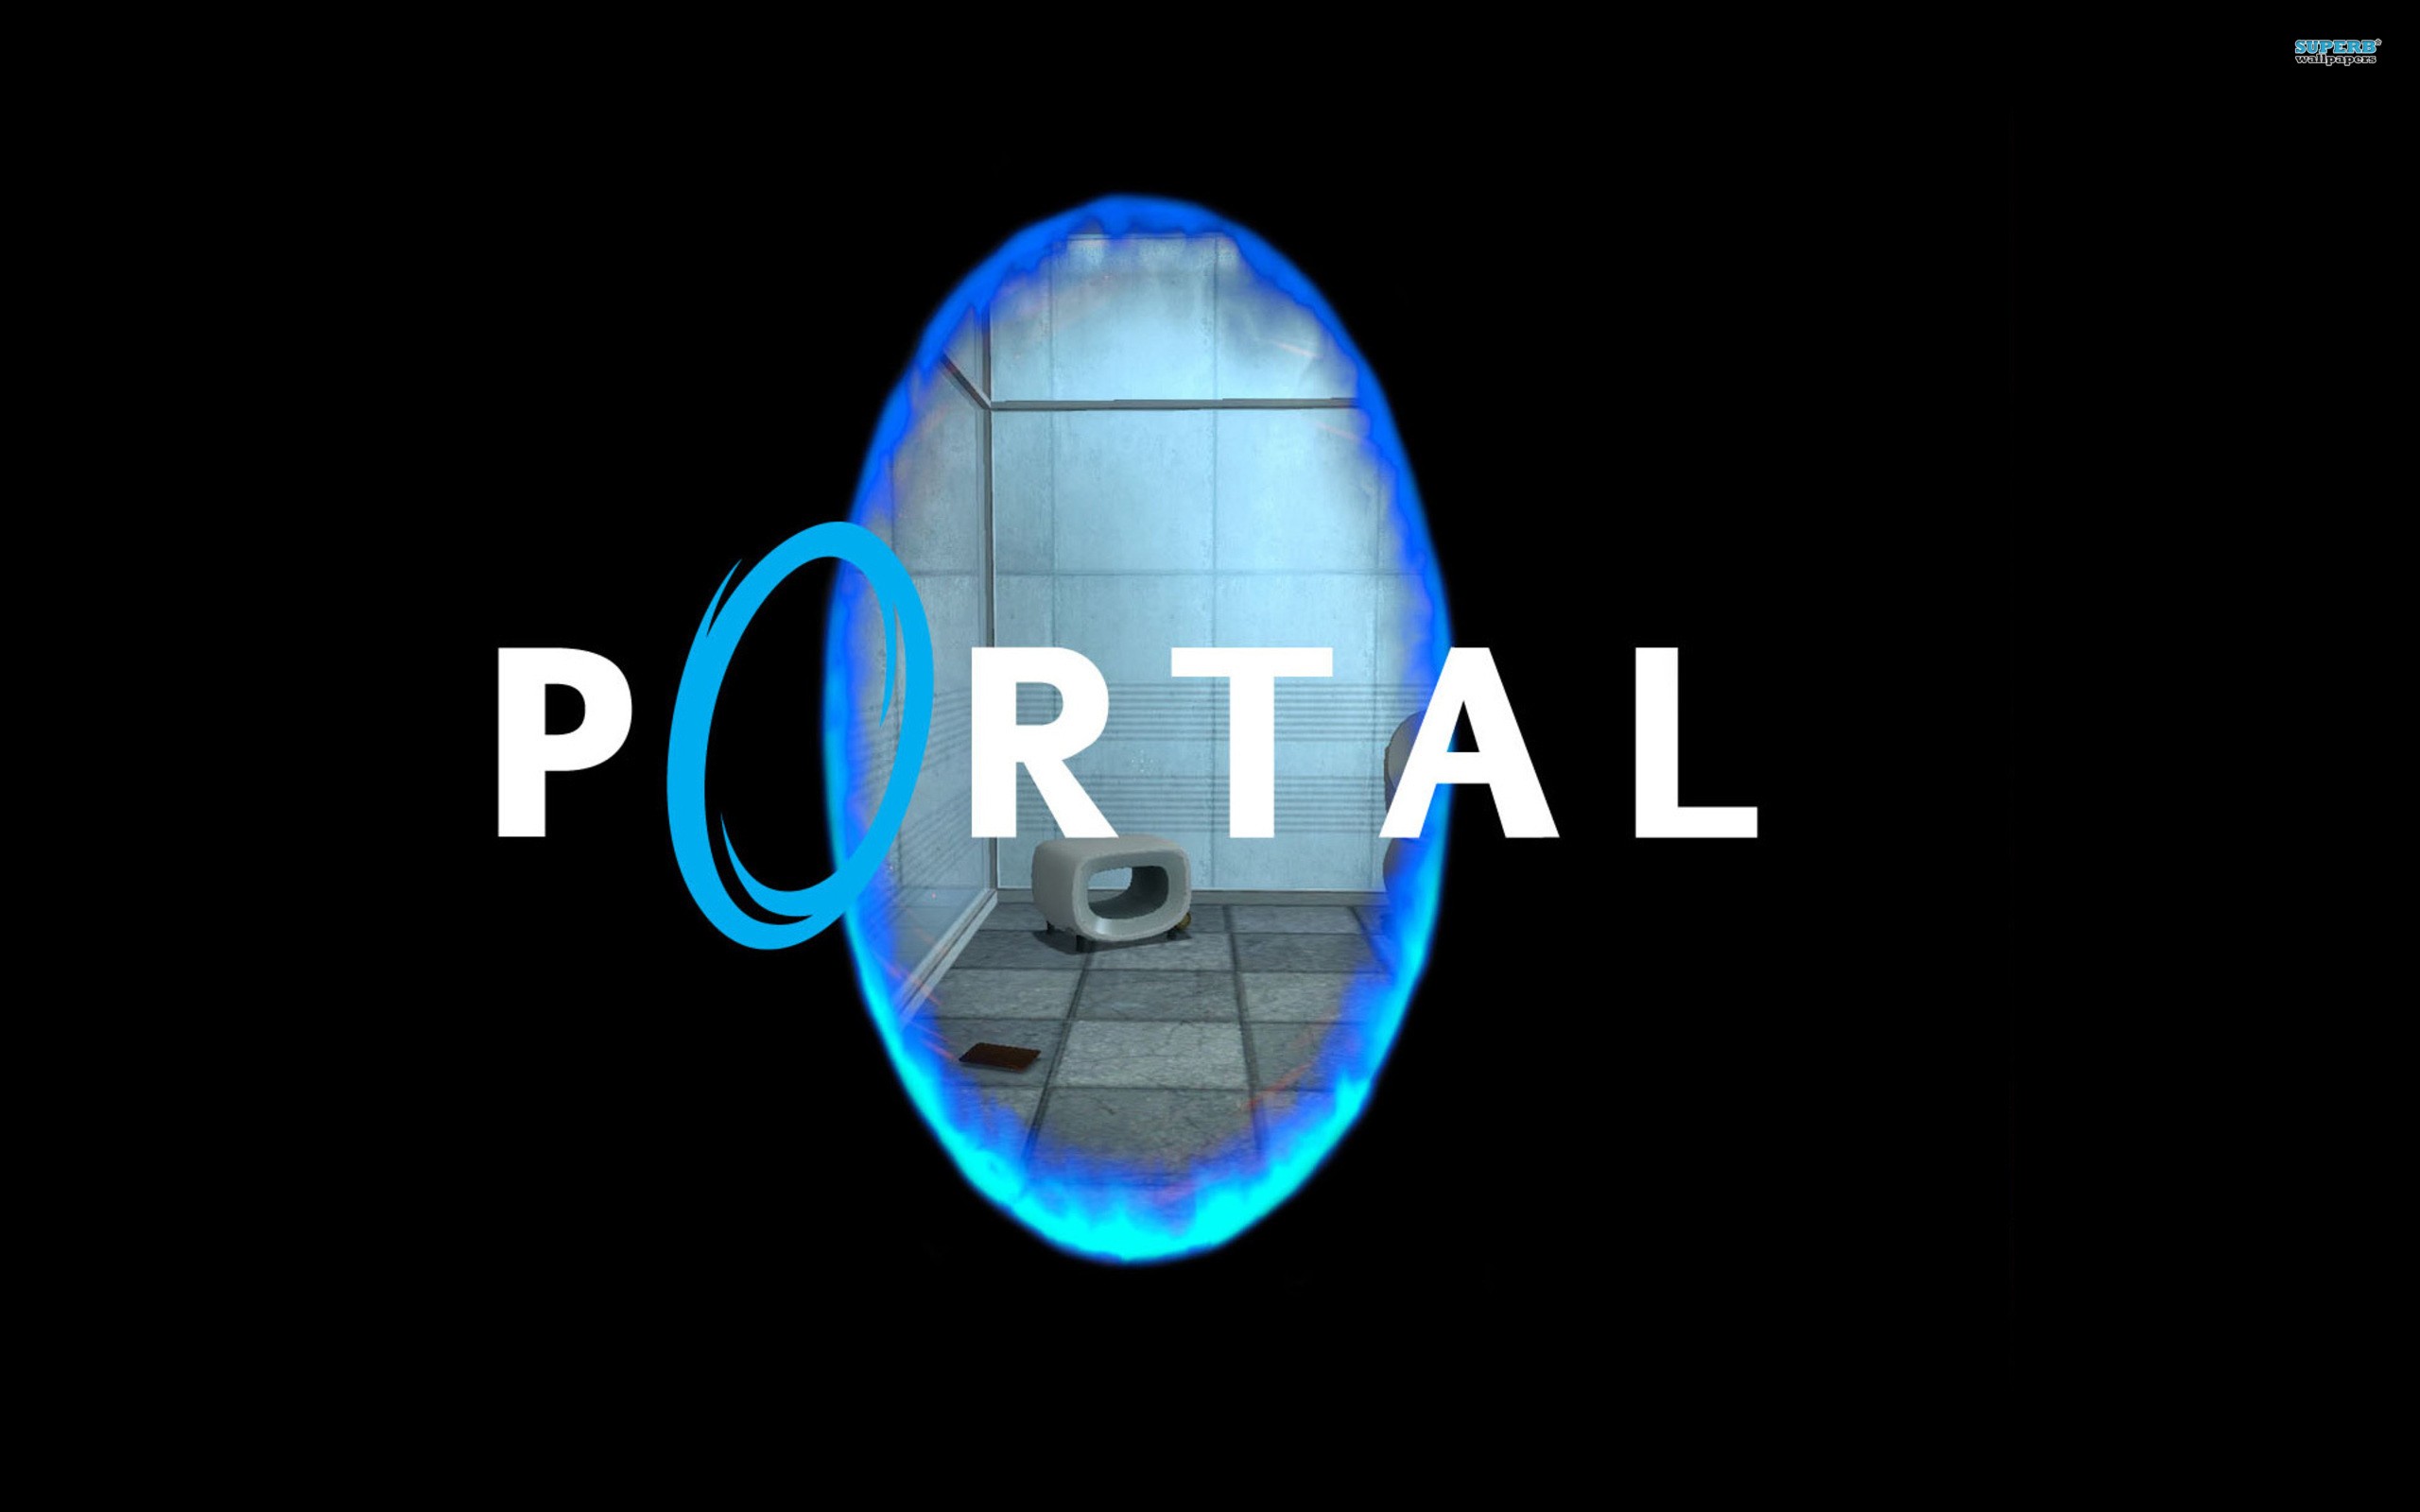 General 2560x1600 video games black background Portal (game) Valve Corporation PC gaming video game art